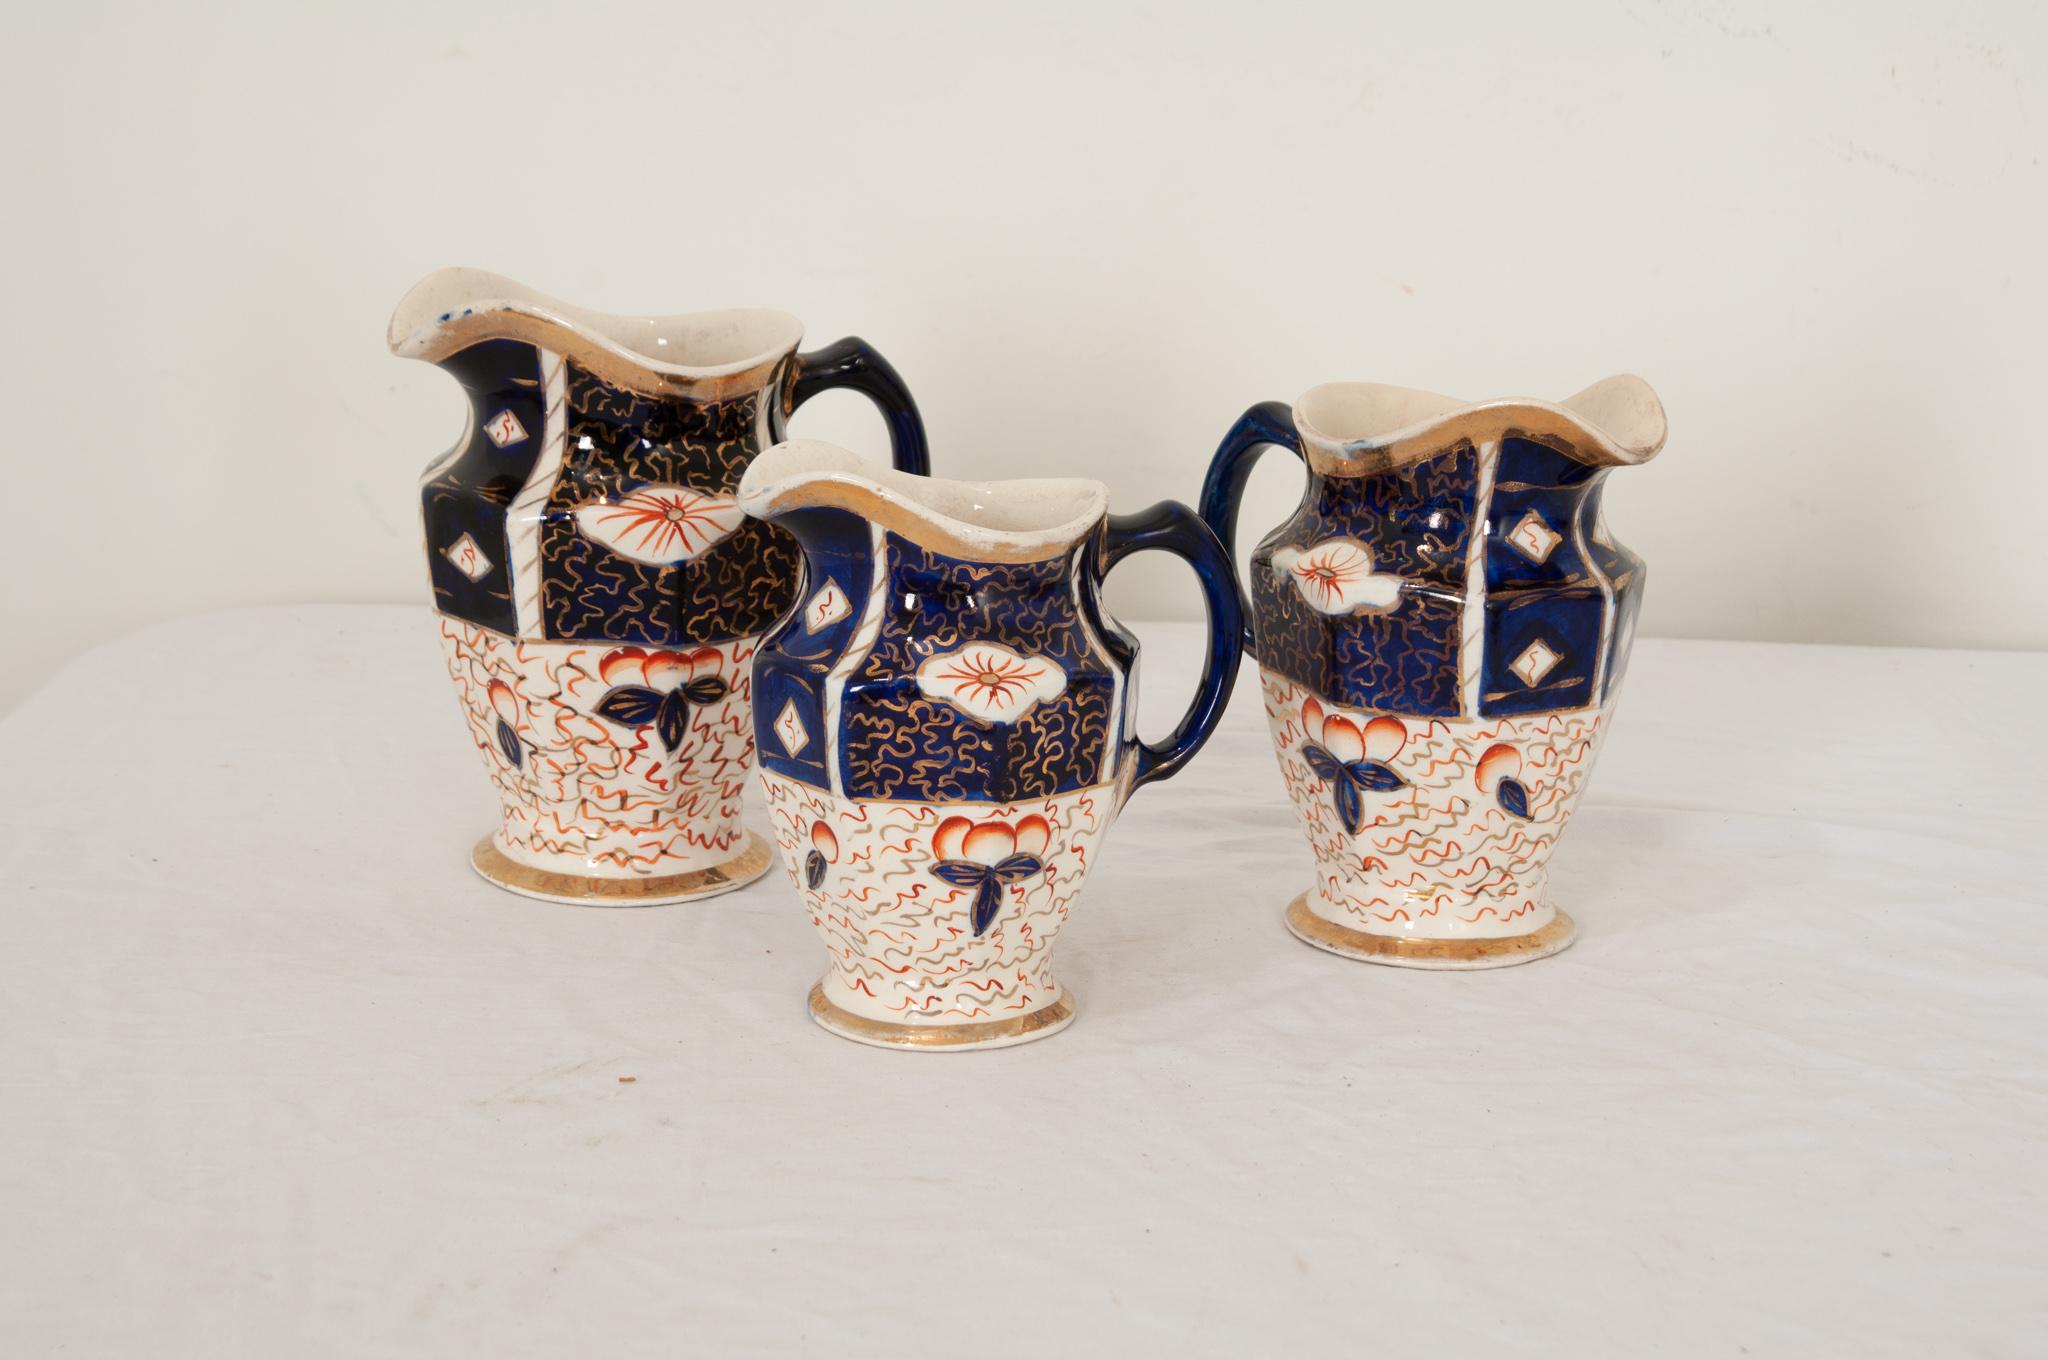 A collection of English 19th century porcelain pitchers with a hand painted finish. Sold as a set, these decorative pitchers feature rich cobalt blue and deep red Asian aesthetic designs on creamware that offsets the hand painted gold highlights.